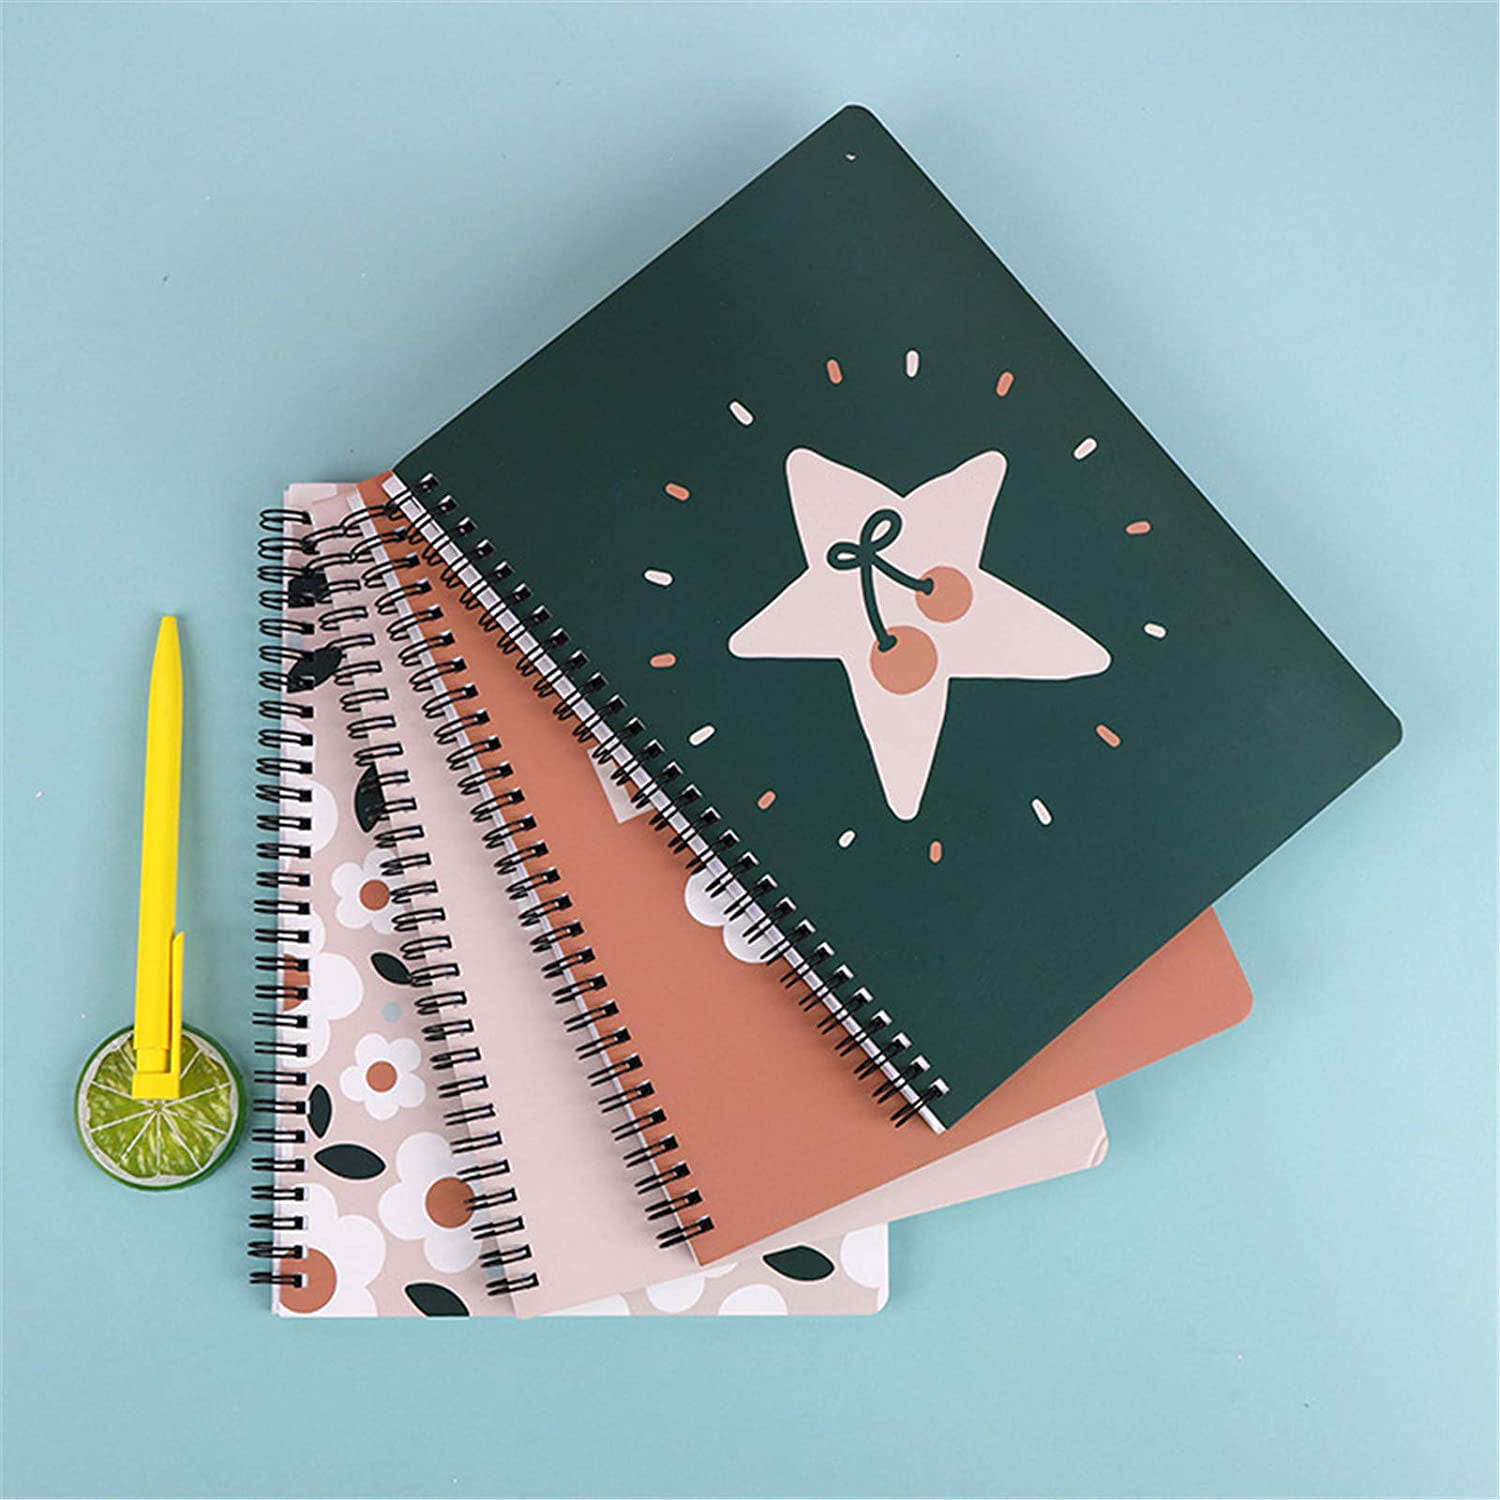 4 Pack (a5) Spiral Notebooks Journal Hardcover 8.26 X 5.9 Inch 160